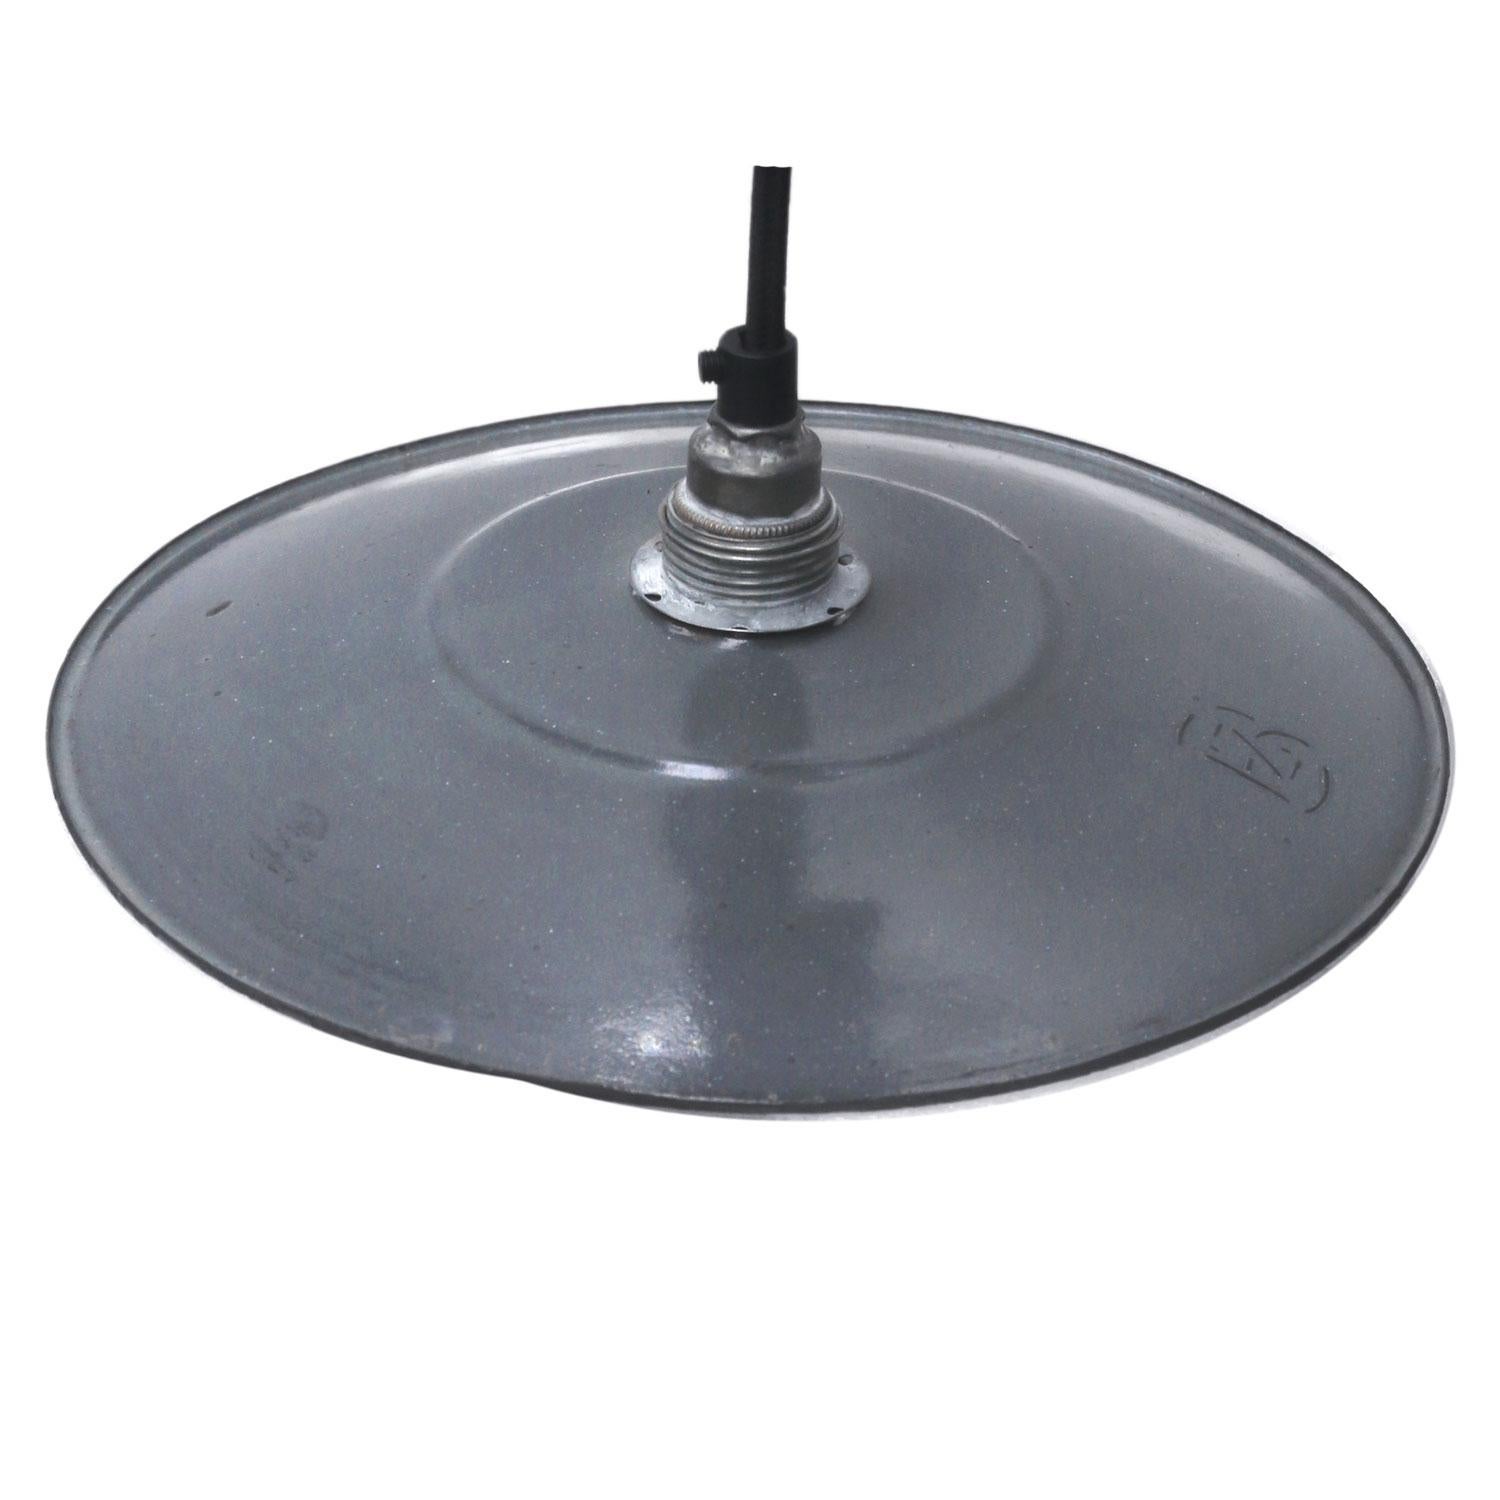 Small French Industrial pendant lamp.

Measure: Weight 0.3 kg / 0.7 lb

E14 bulb holder. Priced per individual item. All lamps have been made suitable by international standards for incandescent light bulbs, energy-efficient and LED bulbs. The new